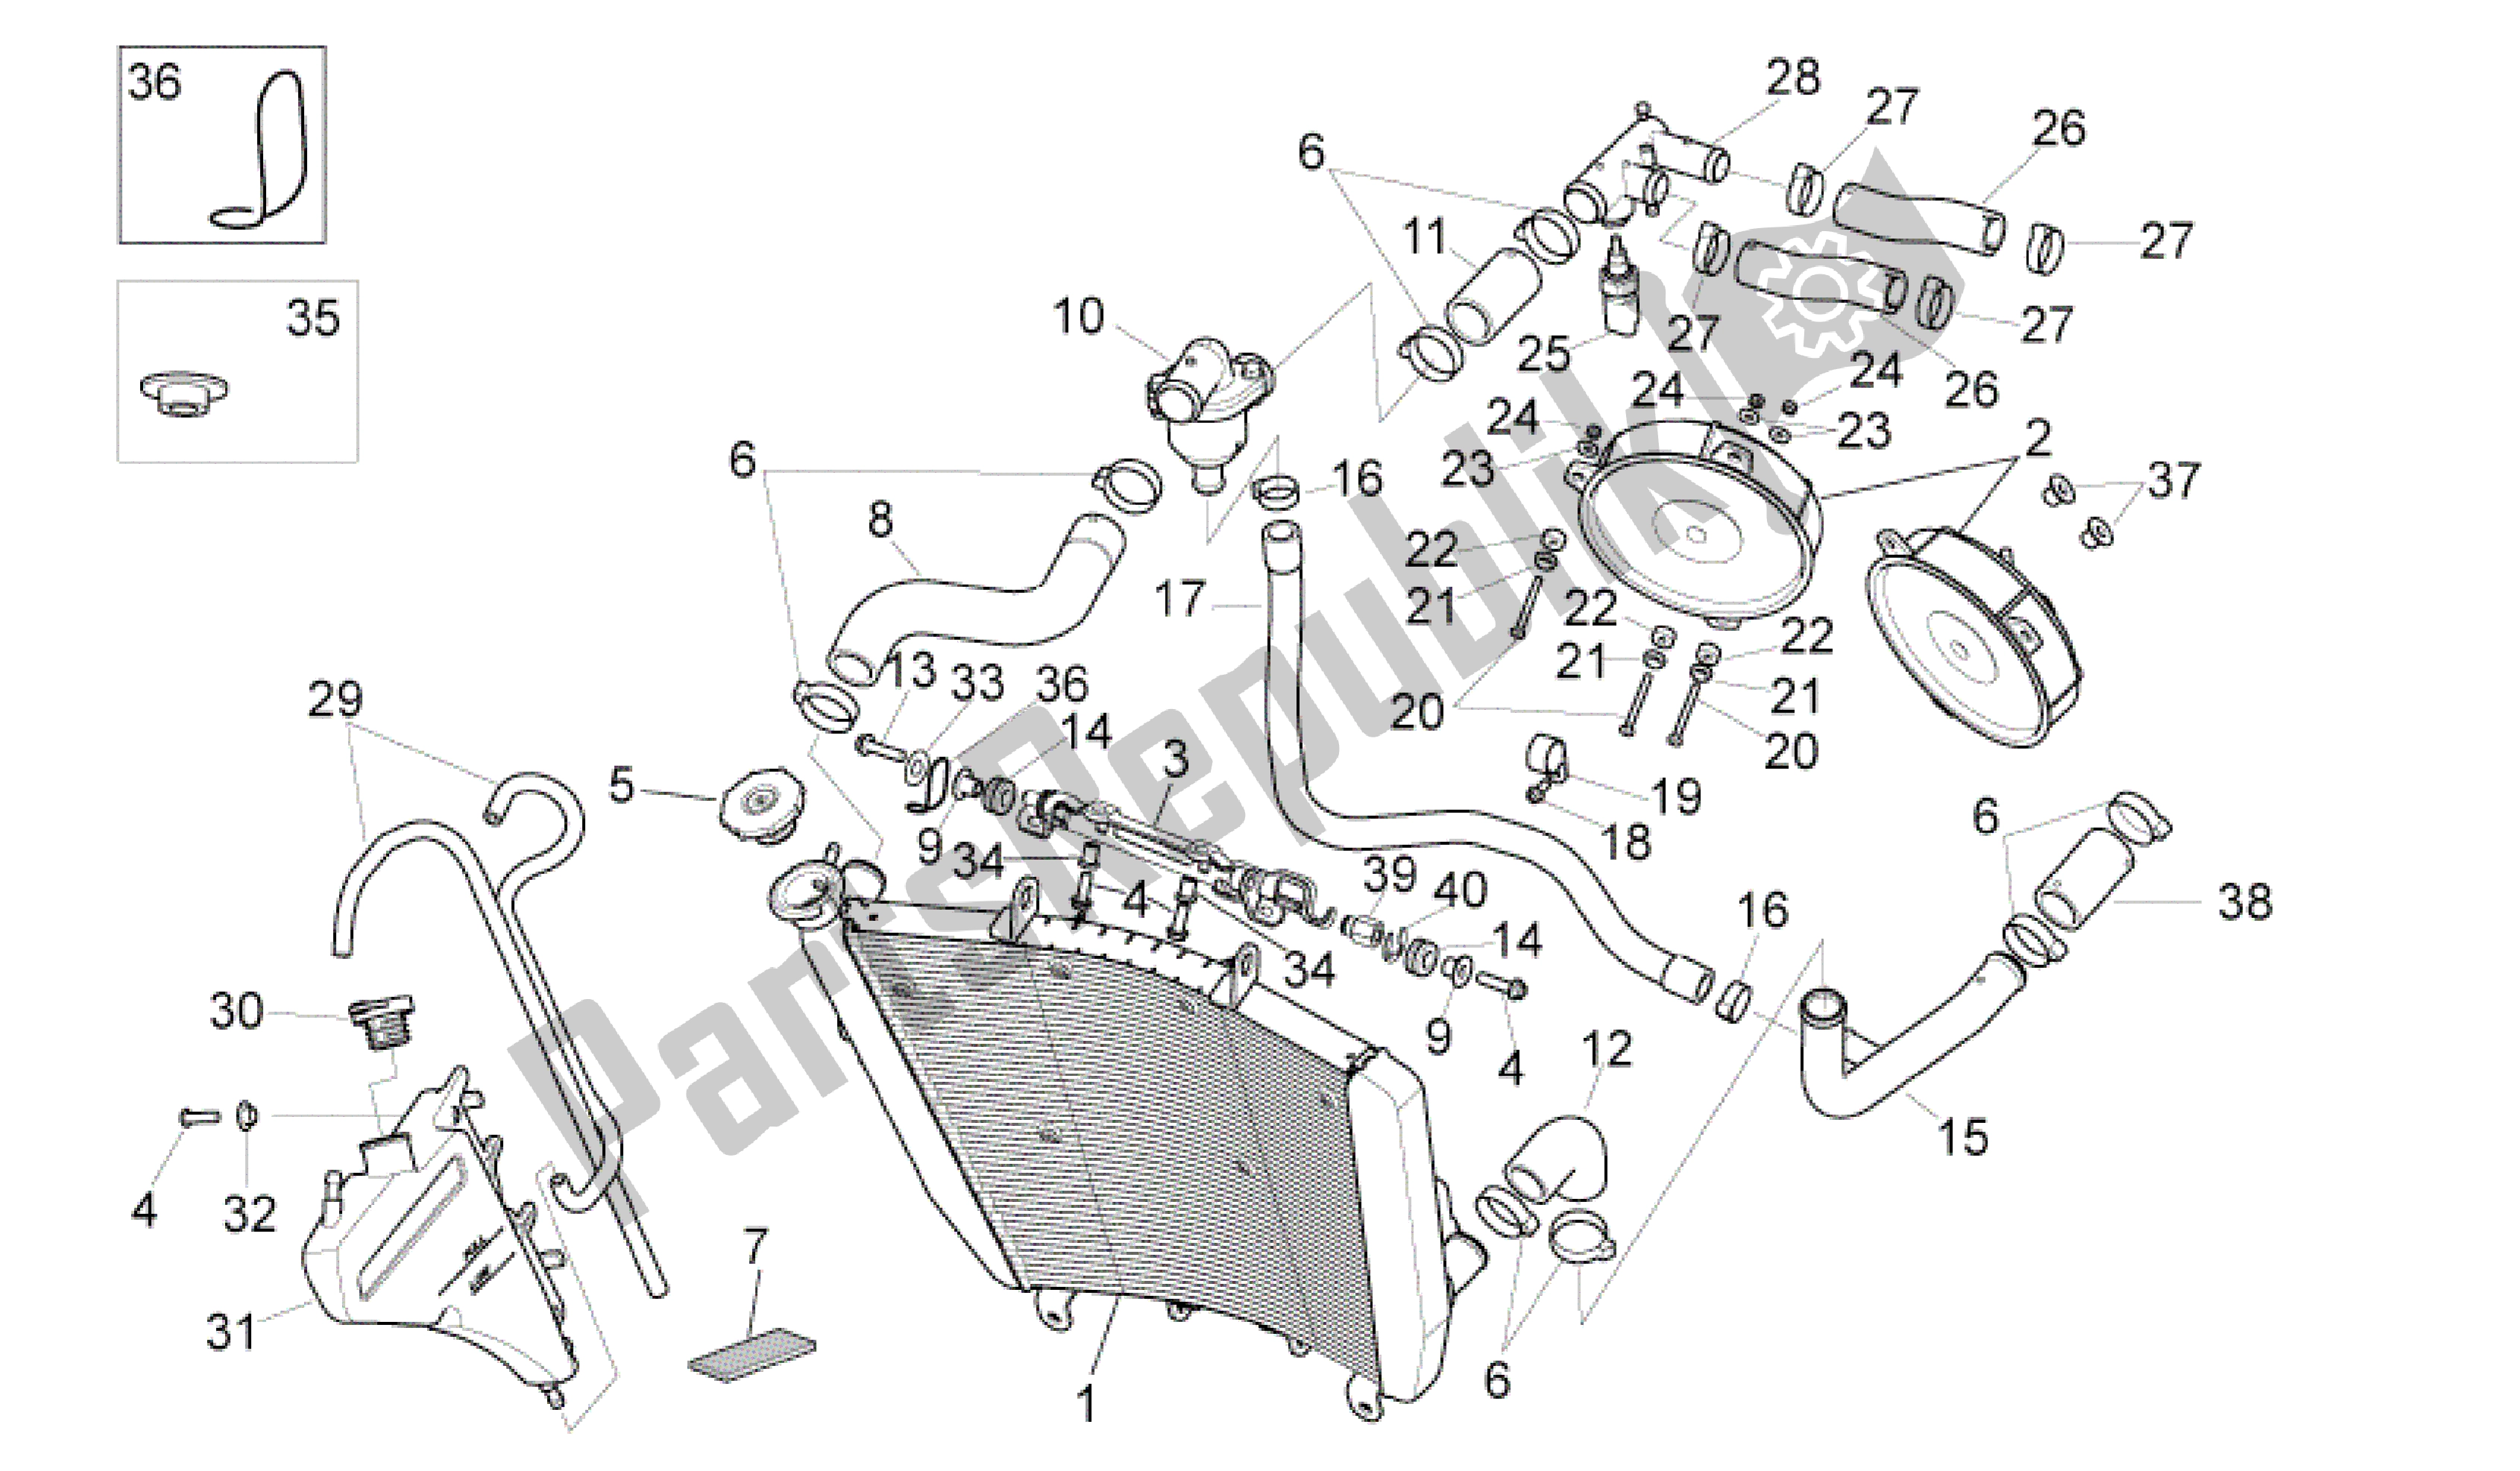 All parts for the Cooling System of the Aprilia RSV4 Aprc R 3982 1000 2011 - 2012